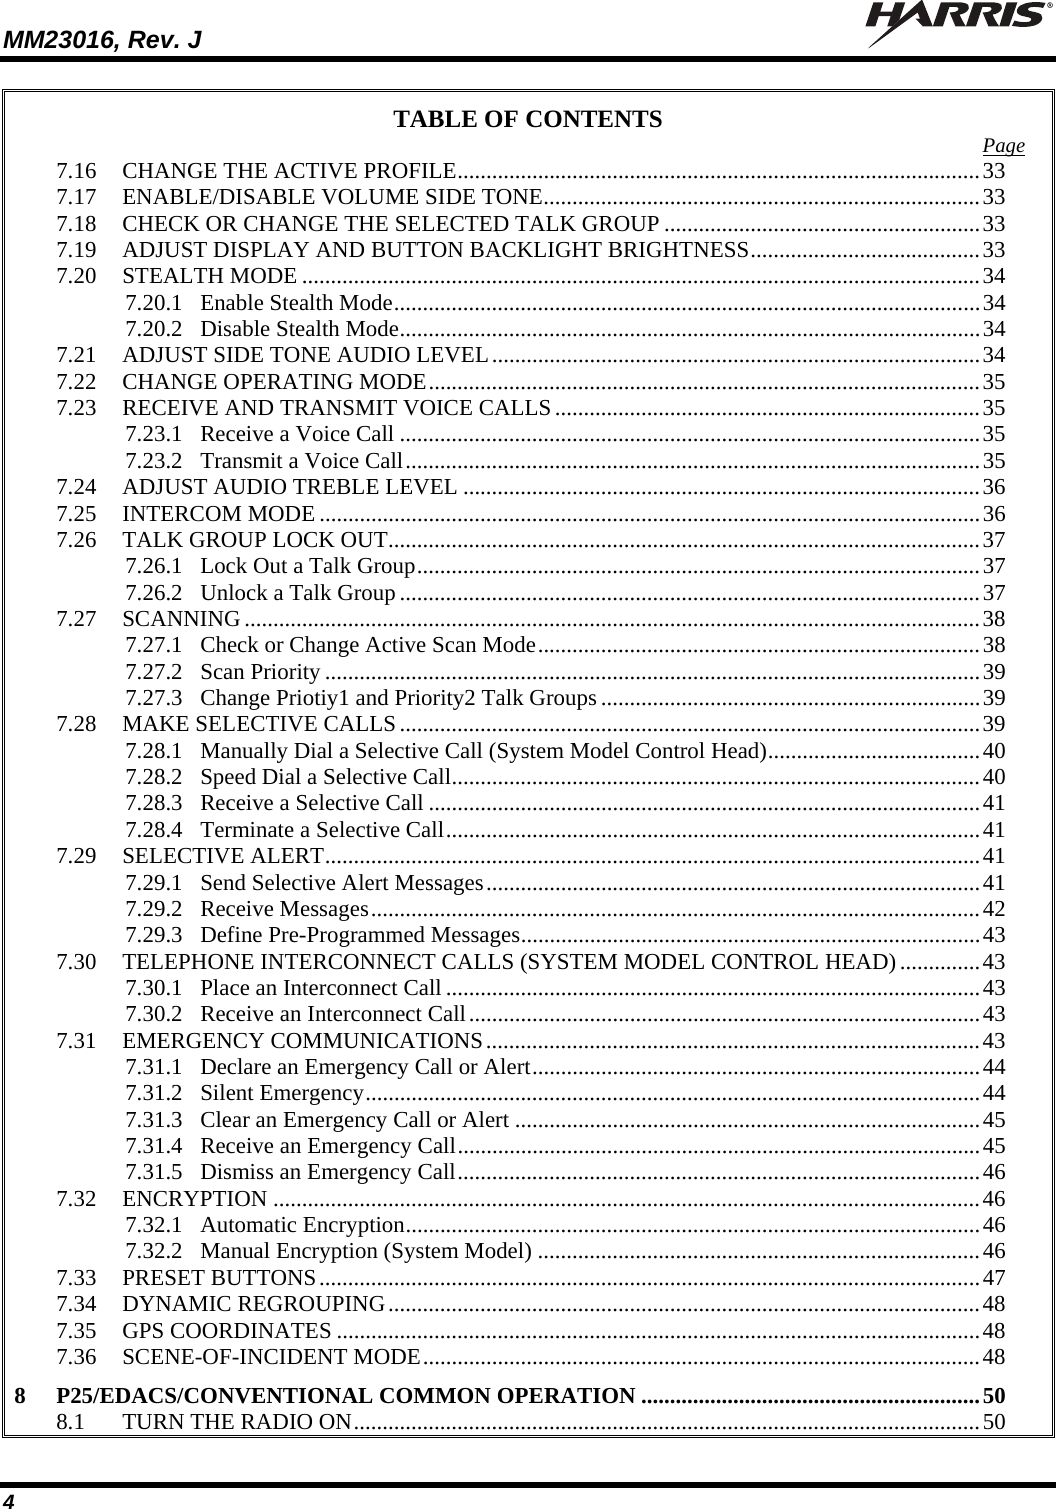 MM23016, Rev. J   4 TABLE OF CONTENTS  Page 7.16 CHANGE THE ACTIVE PROFILE...........................................................................................33 7.17 ENABLE/DISABLE VOLUME SIDE TONE............................................................................33 7.18 CHECK OR CHANGE THE SELECTED TALK GROUP .......................................................33 7.19 ADJUST DISPLAY AND BUTTON BACKLIGHT BRIGHTNESS........................................33 7.20 STEALTH MODE ......................................................................................................................34 7.20.1 Enable Stealth Mode......................................................................................................34 7.20.2 Disable Stealth Mode.....................................................................................................34 7.21 ADJUST SIDE TONE AUDIO LEVEL.....................................................................................34 7.22 CHANGE OPERATING MODE................................................................................................35 7.23 RECEIVE AND TRANSMIT VOICE CALLS ..........................................................................35 7.23.1 Receive a Voice Call .....................................................................................................35 7.23.2 Transmit a Voice Call....................................................................................................35 7.24 ADJUST AUDIO TREBLE LEVEL ..........................................................................................36 7.25 INTERCOM MODE ...................................................................................................................36 7.26 TALK GROUP LOCK OUT.......................................................................................................37 7.26.1 Lock Out a Talk Group..................................................................................................37 7.26.2 Unlock a Talk Group.....................................................................................................37 7.27 SCANNING ................................................................................................................................38 7.27.1 Check or Change Active Scan Mode.............................................................................38 7.27.2 Scan Priority ..................................................................................................................39 7.27.3 Change Priotiy1 and Priority2 Talk Groups ..................................................................39 7.28 MAKE SELECTIVE CALLS.....................................................................................................39 7.28.1 Manually Dial a Selective Call (System Model Control Head).....................................40 7.28.2 Speed Dial a Selective Call............................................................................................40 7.28.3 Receive a Selective Call ................................................................................................41 7.28.4 Terminate a Selective Call.............................................................................................41 7.29 SELECTIVE ALERT..................................................................................................................41 7.29.1 Send Selective Alert Messages......................................................................................41 7.29.2 Receive Messages..........................................................................................................42 7.29.3 Define Pre-Programmed Messages................................................................................43 7.30 TELEPHONE INTERCONNECT CALLS (SYSTEM MODEL CONTROL HEAD)..............43 7.30.1 Place an Interconnect Call .............................................................................................43 7.30.2 Receive an Interconnect Call.........................................................................................43 7.31 EMERGENCY COMMUNICATIONS......................................................................................43 7.31.1 Declare an Emergency Call or Alert..............................................................................44 7.31.2 Silent Emergency...........................................................................................................44 7.31.3 Clear an Emergency Call or Alert .................................................................................45 7.31.4 Receive an Emergency Call...........................................................................................45 7.31.5 Dismiss an Emergency Call...........................................................................................46 7.32 ENCRYPTION ...........................................................................................................................46 7.32.1 Automatic Encryption....................................................................................................46 7.32.2 Manual Encryption (System Model) .............................................................................46 7.33 PRESET BUTTONS...................................................................................................................47 7.34 DYNAMIC REGROUPING.......................................................................................................48 7.35 GPS COORDINATES ................................................................................................................48 7.36 SCENE-OF-INCIDENT MODE.................................................................................................48 8 P25/EDACS/CONVENTIONAL COMMON OPERATION ...........................................................50 8.1 TURN THE RADIO ON.............................................................................................................50 